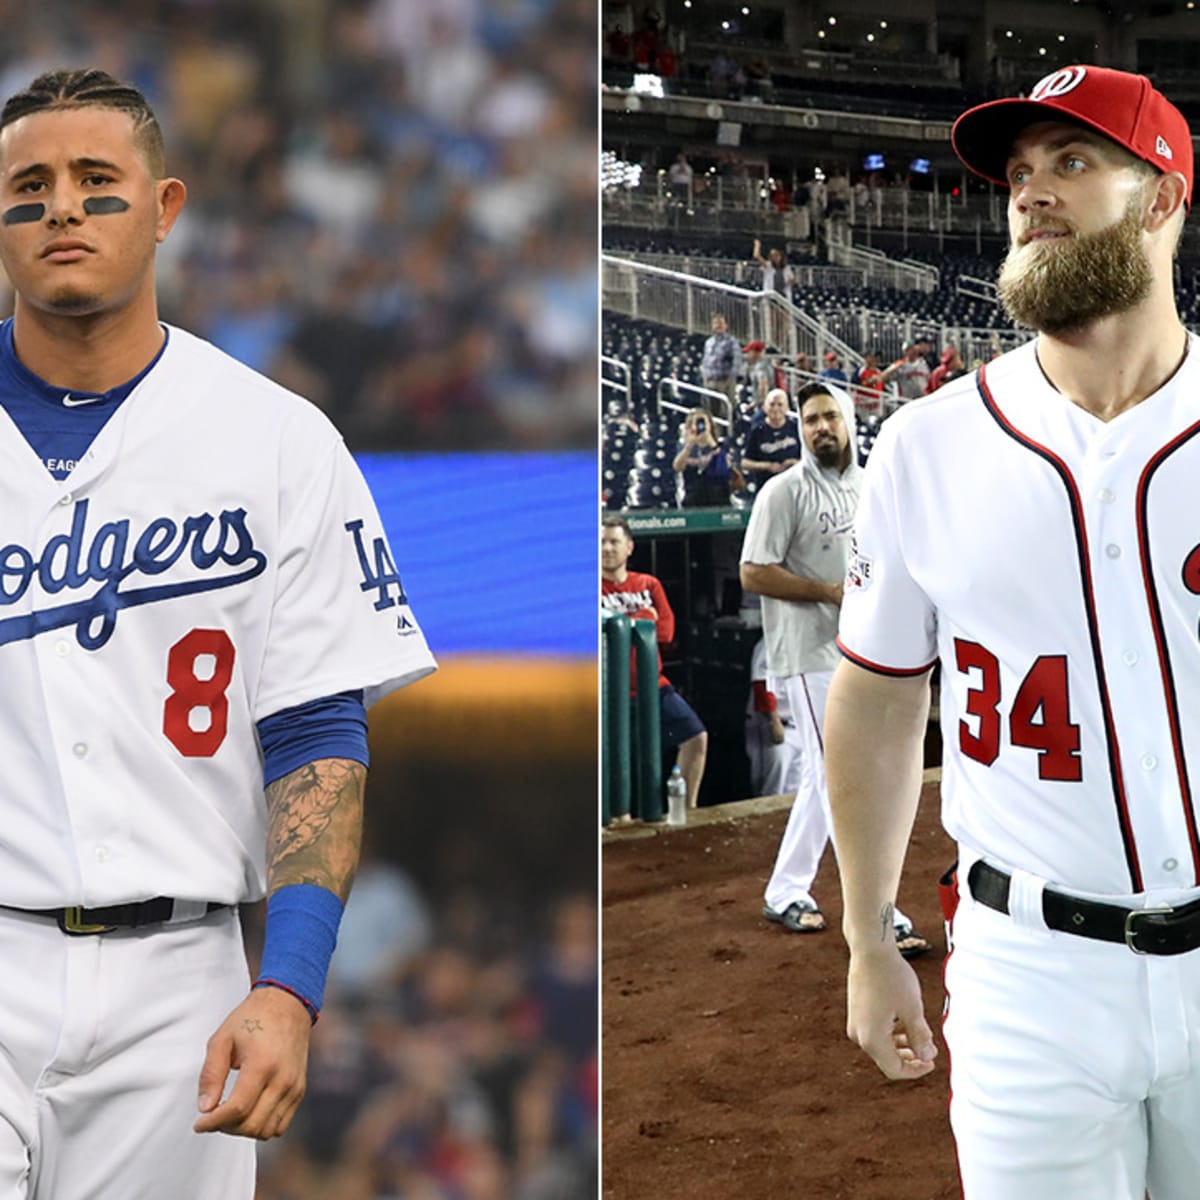 Manny Machado is not comfortable playing the villain everybody seems to  want him to be